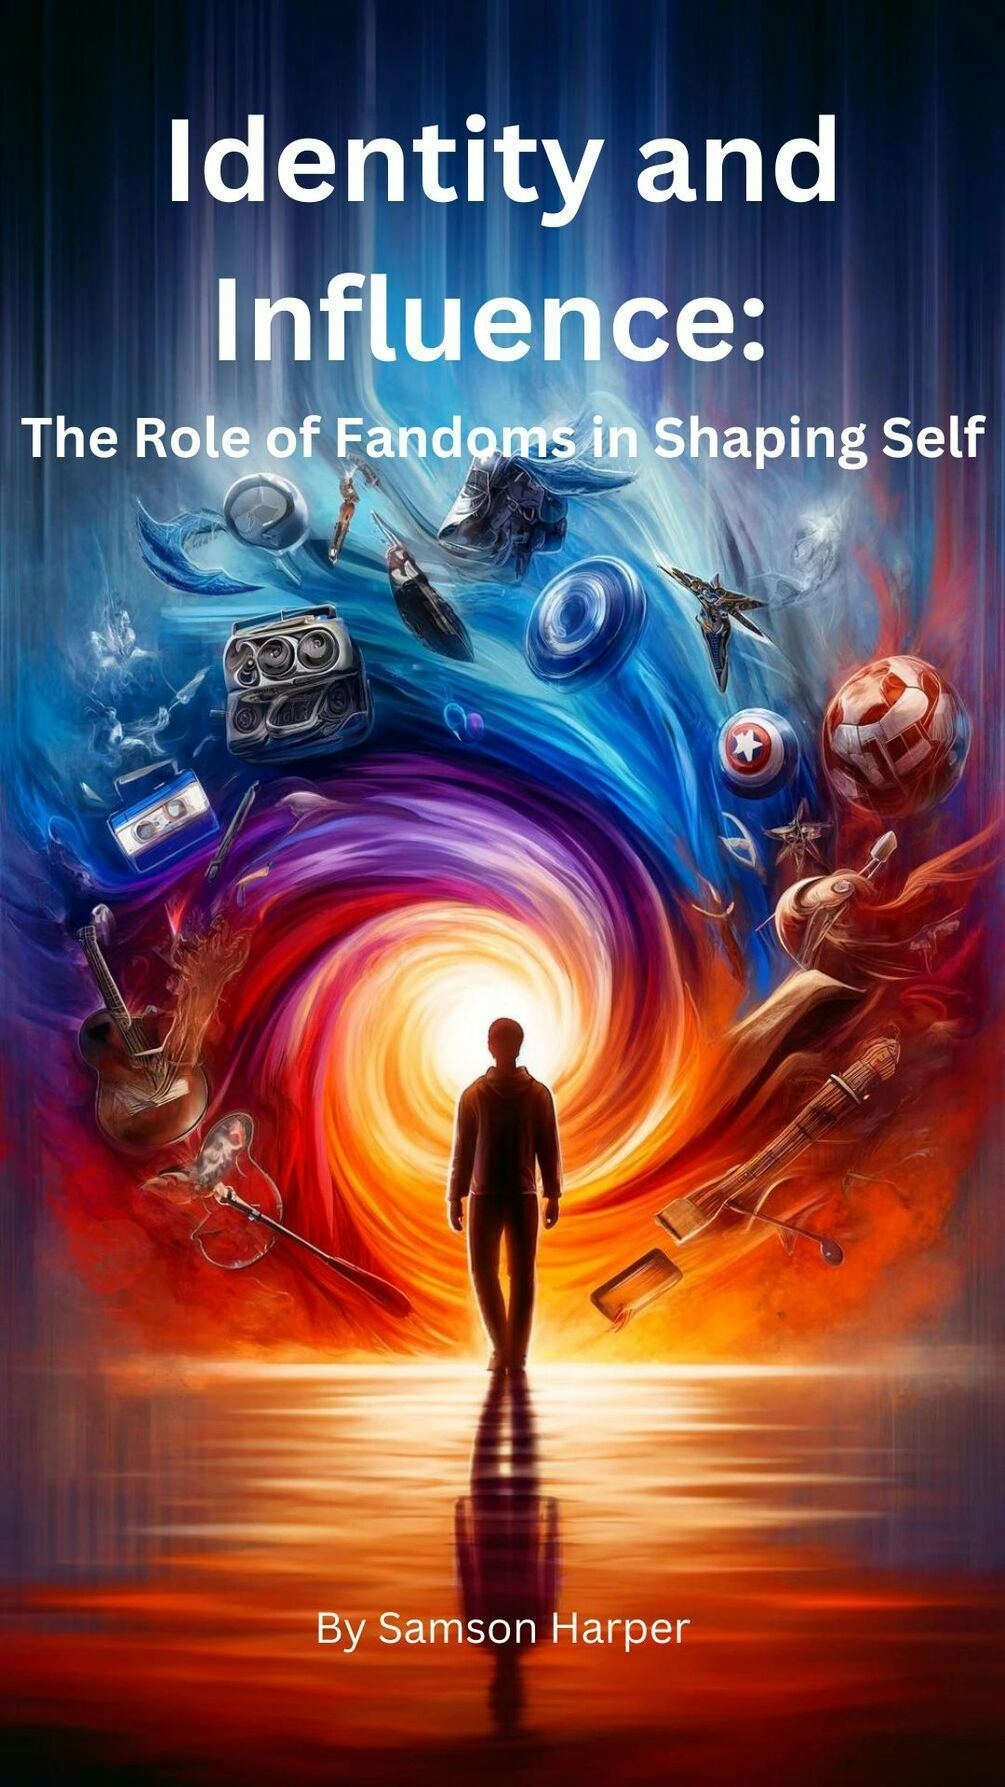 Identity and Influence: The Role of Fandoms in Shaping Self